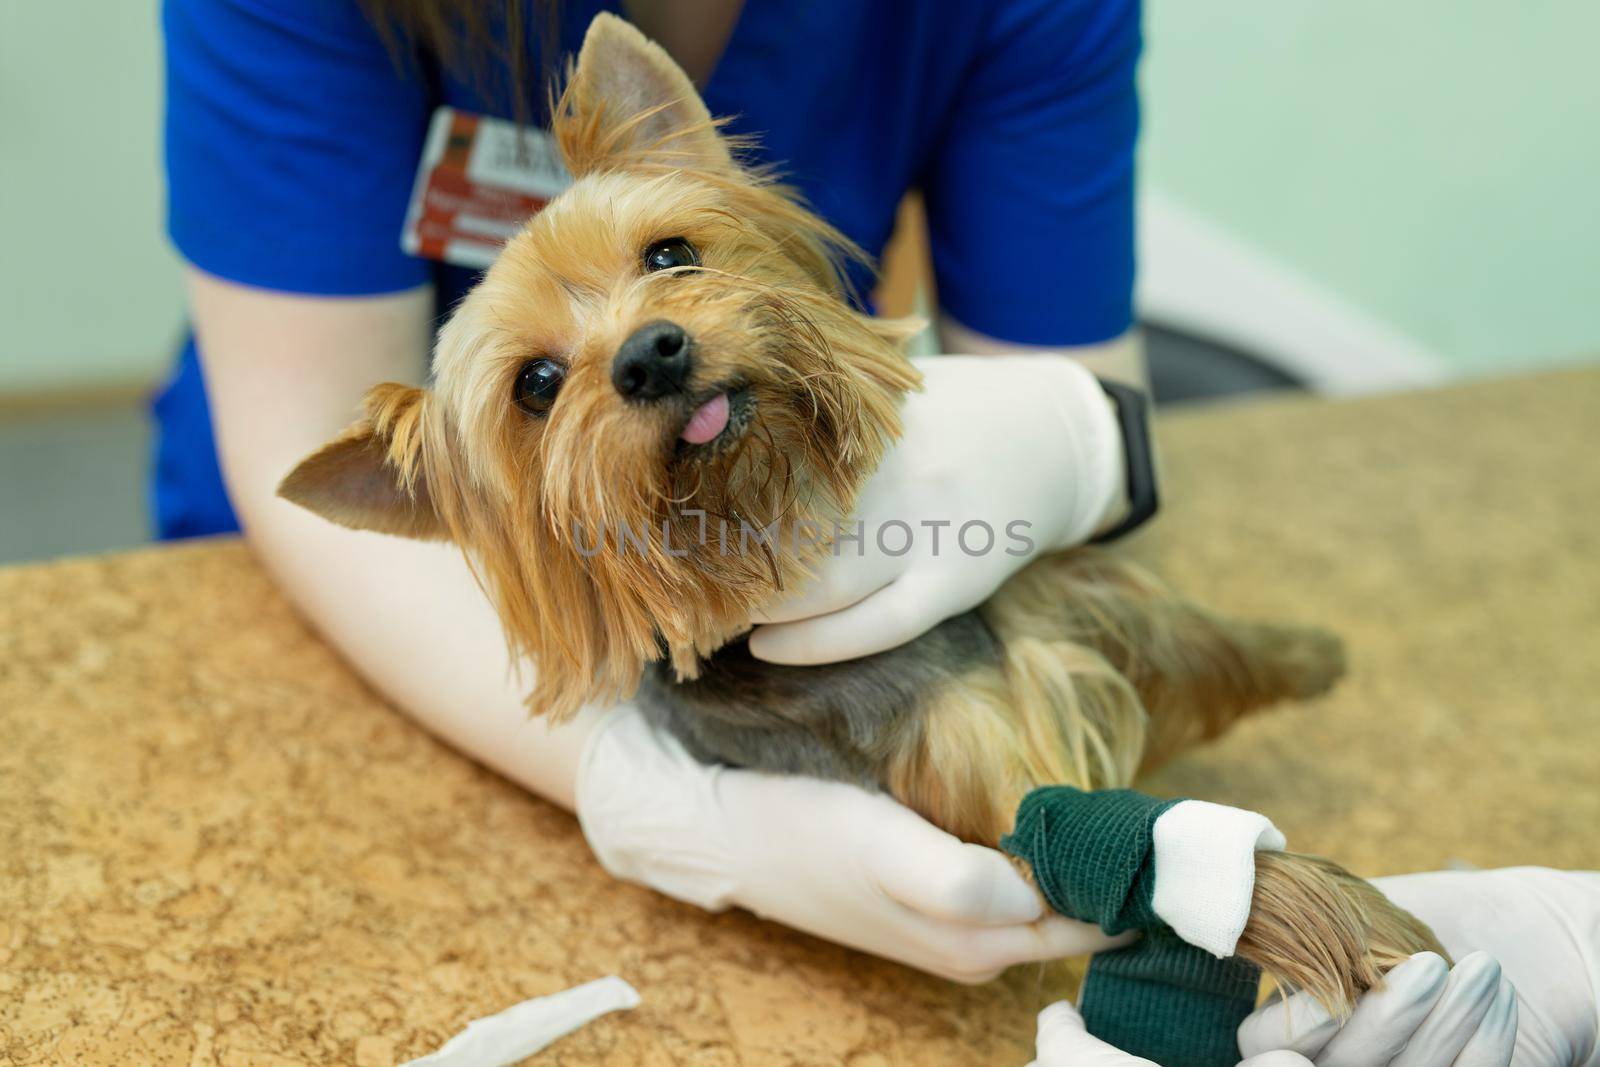 Vet puts a catheter on the dog at the veterinary clinic. by StudioPeace